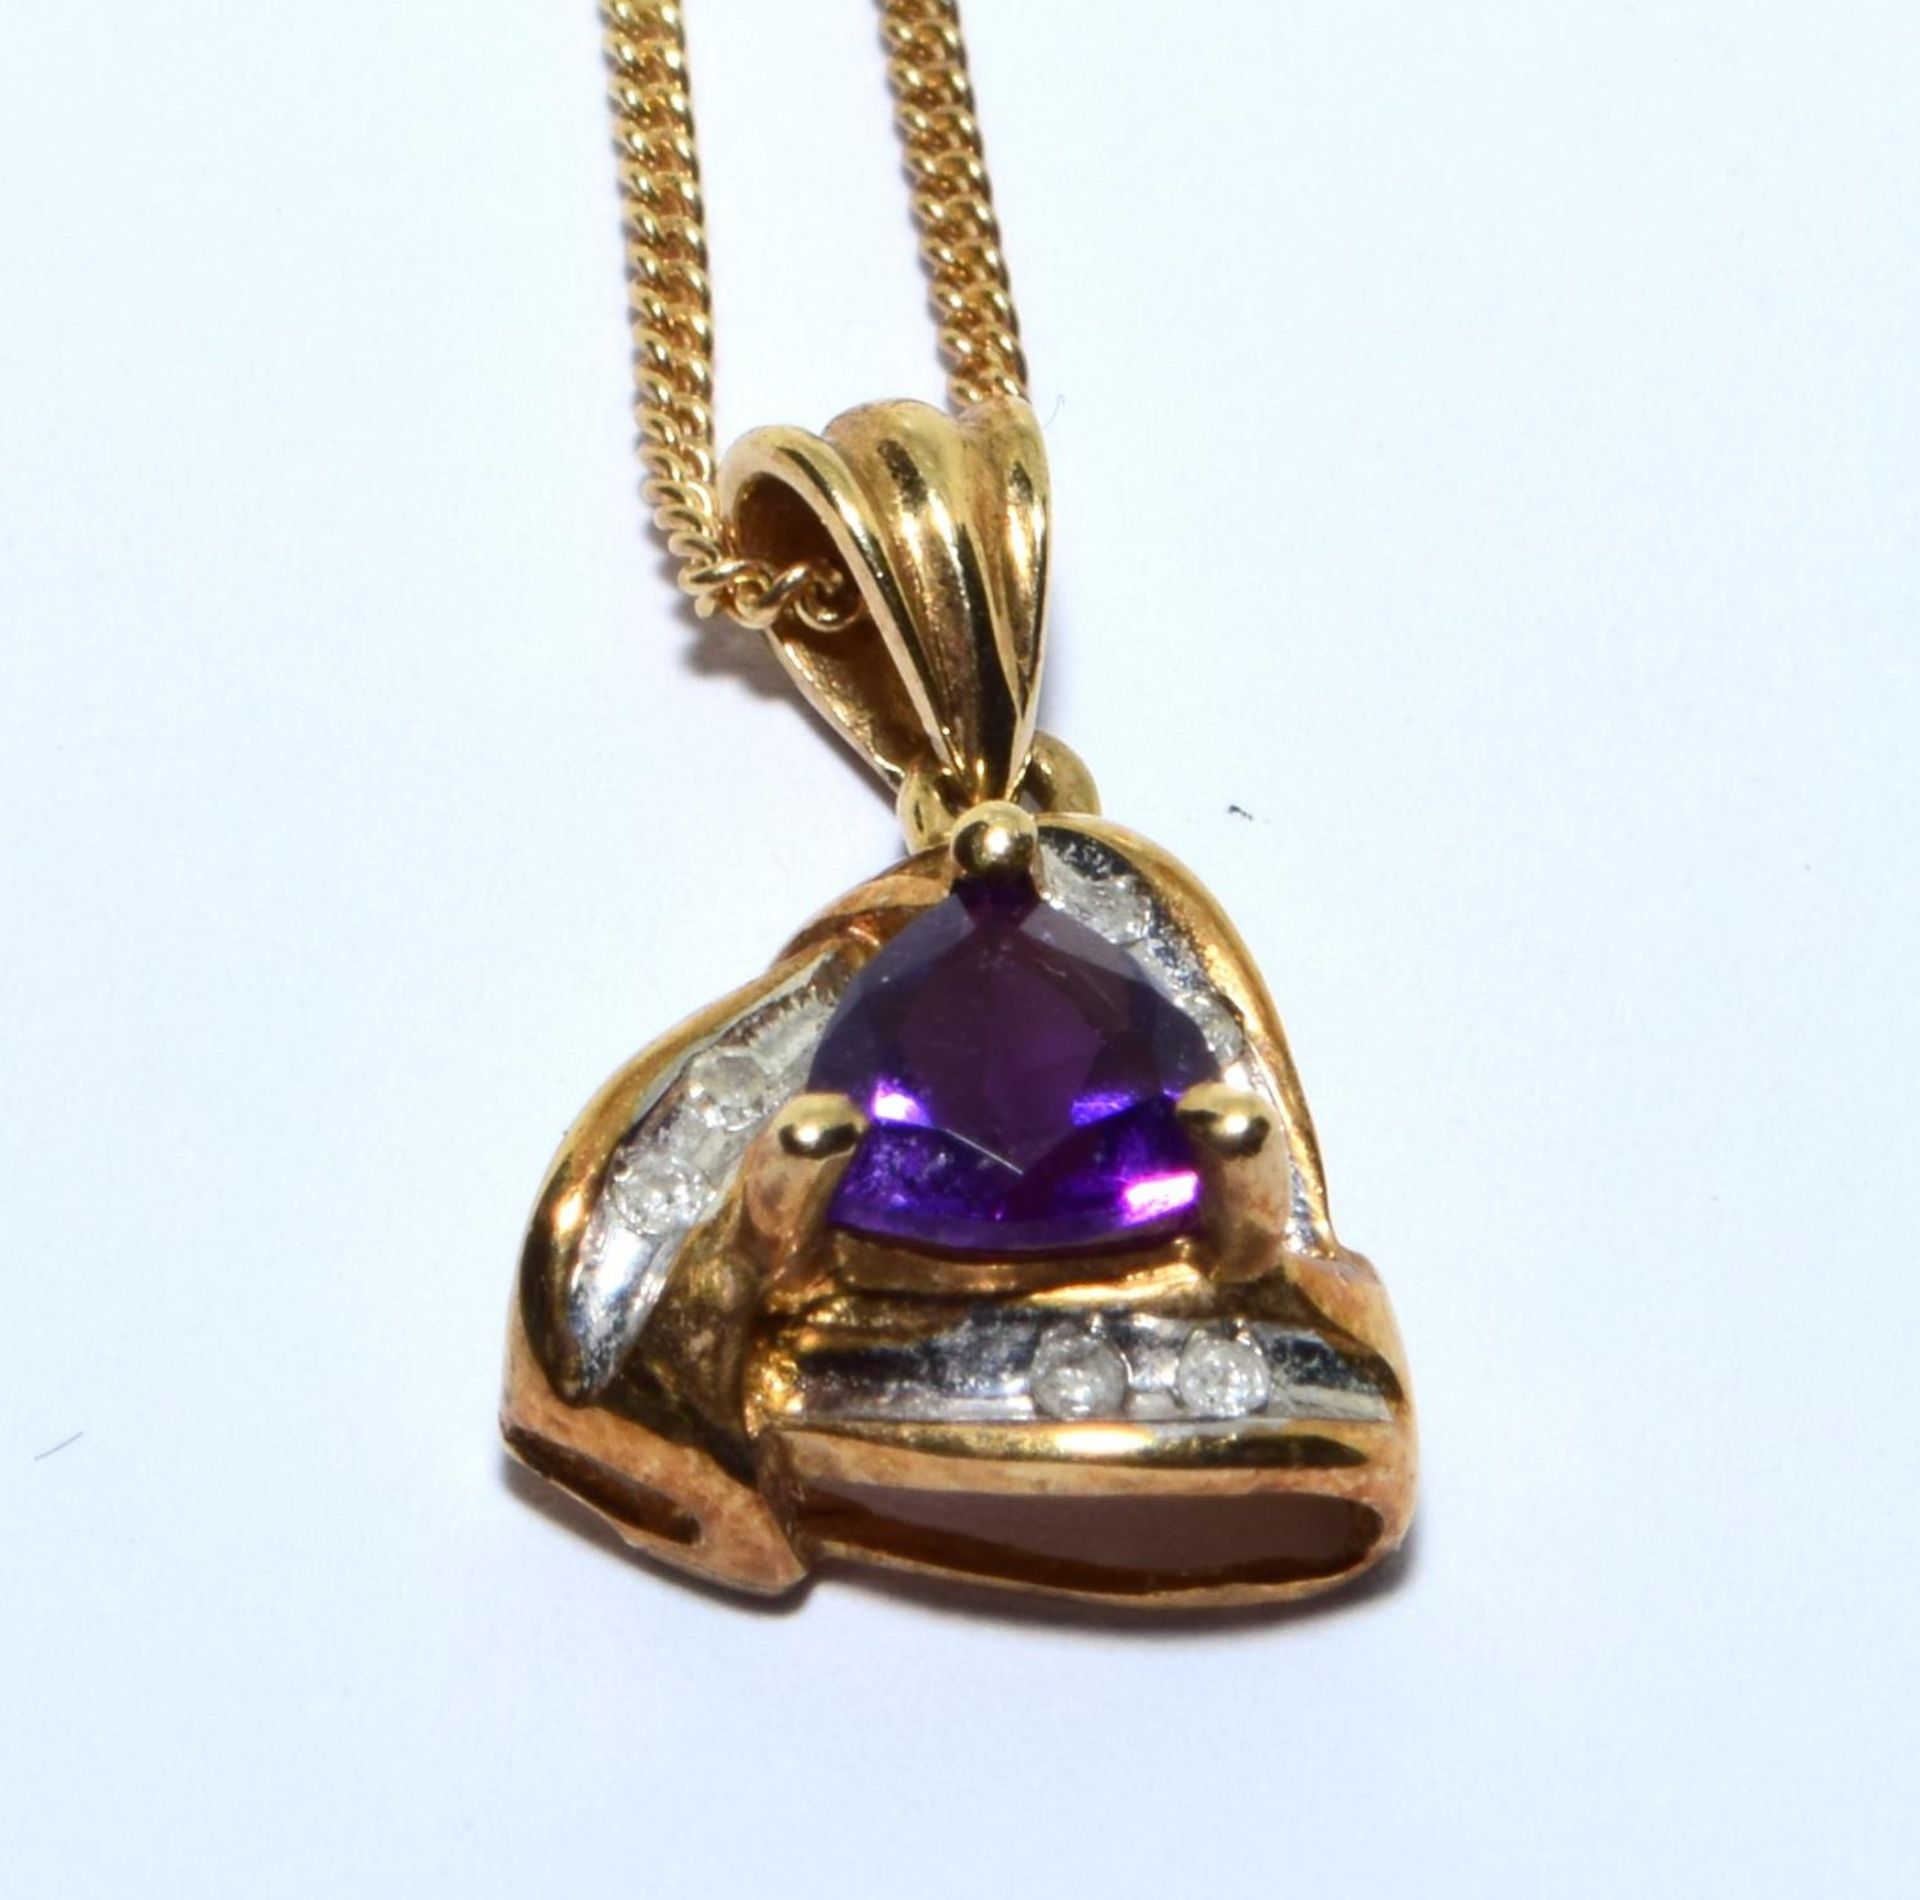 9ct gold Diamond and Amethyst pendant necklace with a chain of 46cm - Image 2 of 6